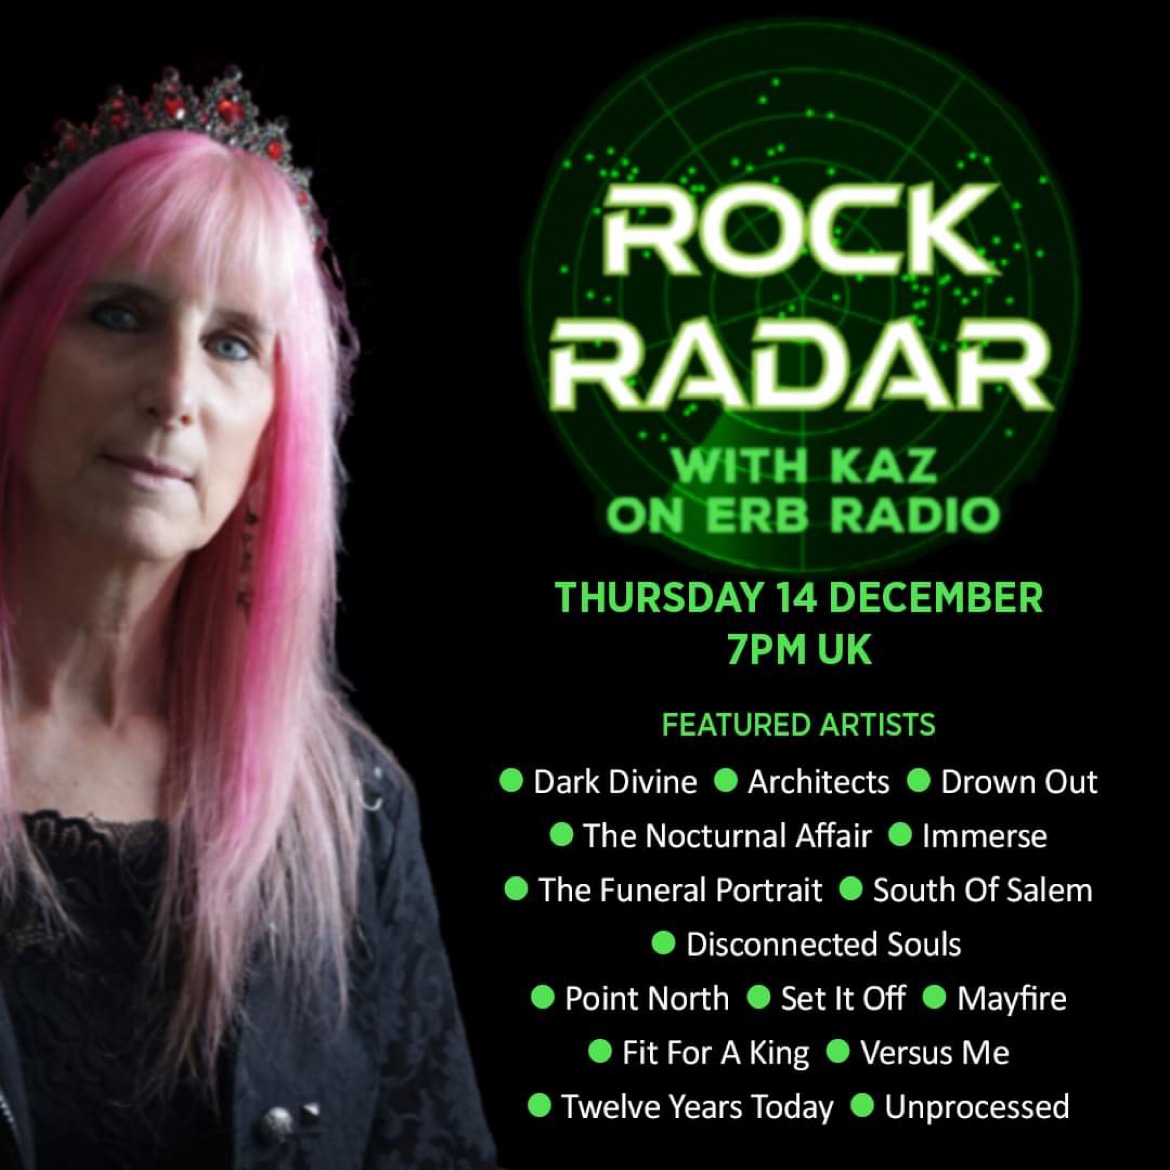 Kaz Ay has been scouring the #RockRadar to bring you the best of the best. Tune in at 7pm for tracks from @DarkDivineMusic | @architectsuk | @ | @Noxaffair | @ | @TFP_tweets | @southofsalemofficial | @DSbandUK | @pointnorthband | @SetItOff | @mayfiremp3 | @fitforaking...